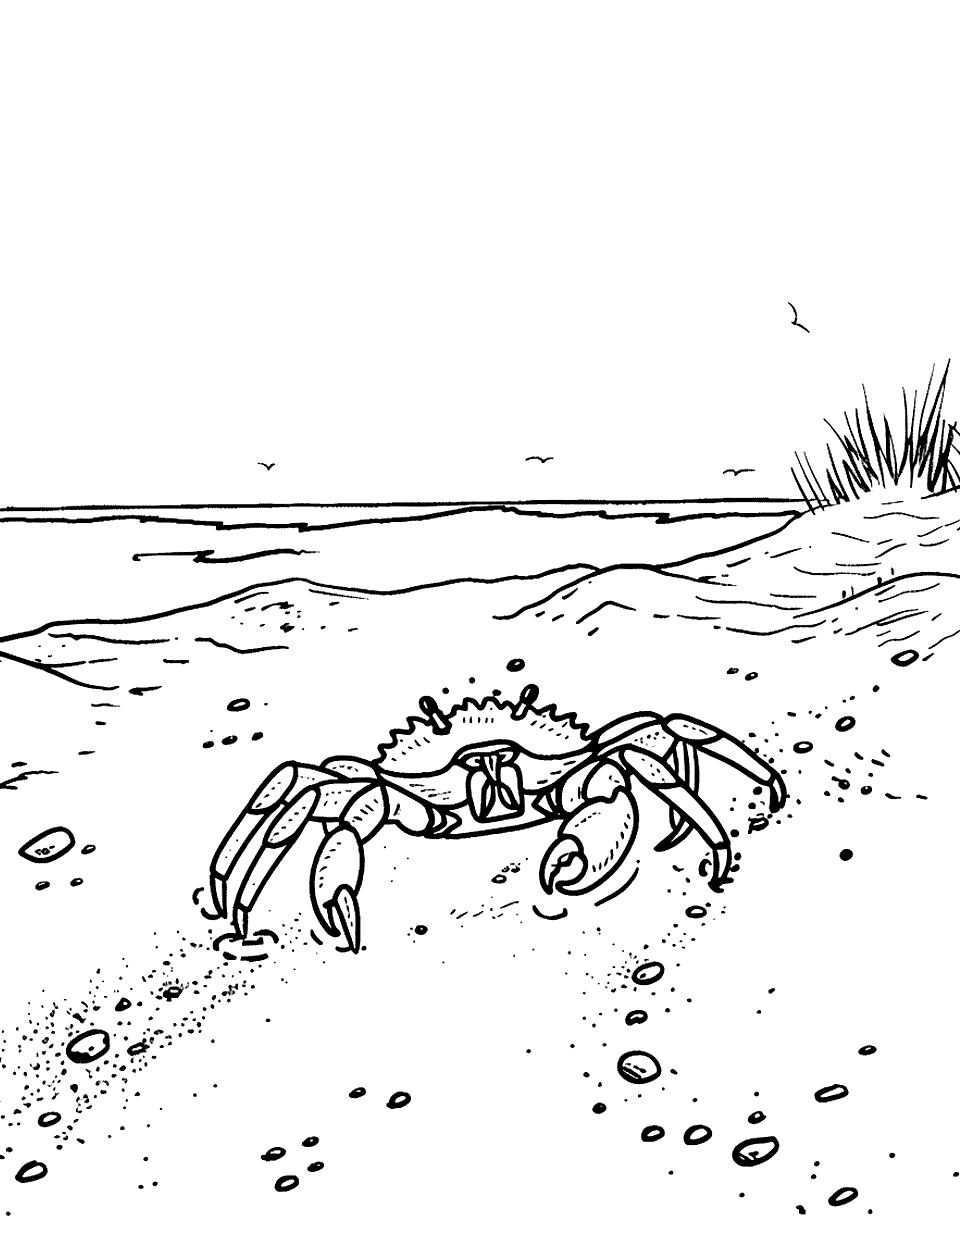 Crab Making Tracks Coloring Page - A scene showing the trail of tracks left by a crab as it moves across the sandy beach.